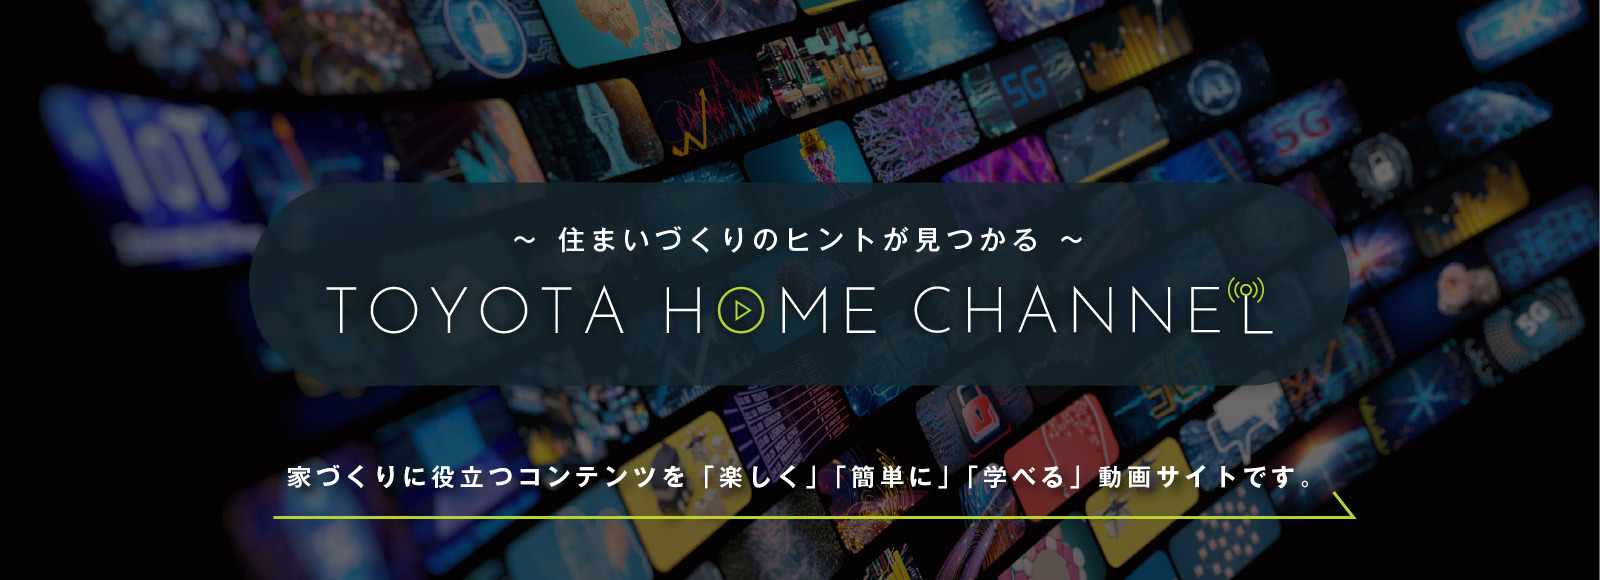 TOYOTA HOME CHANNEL